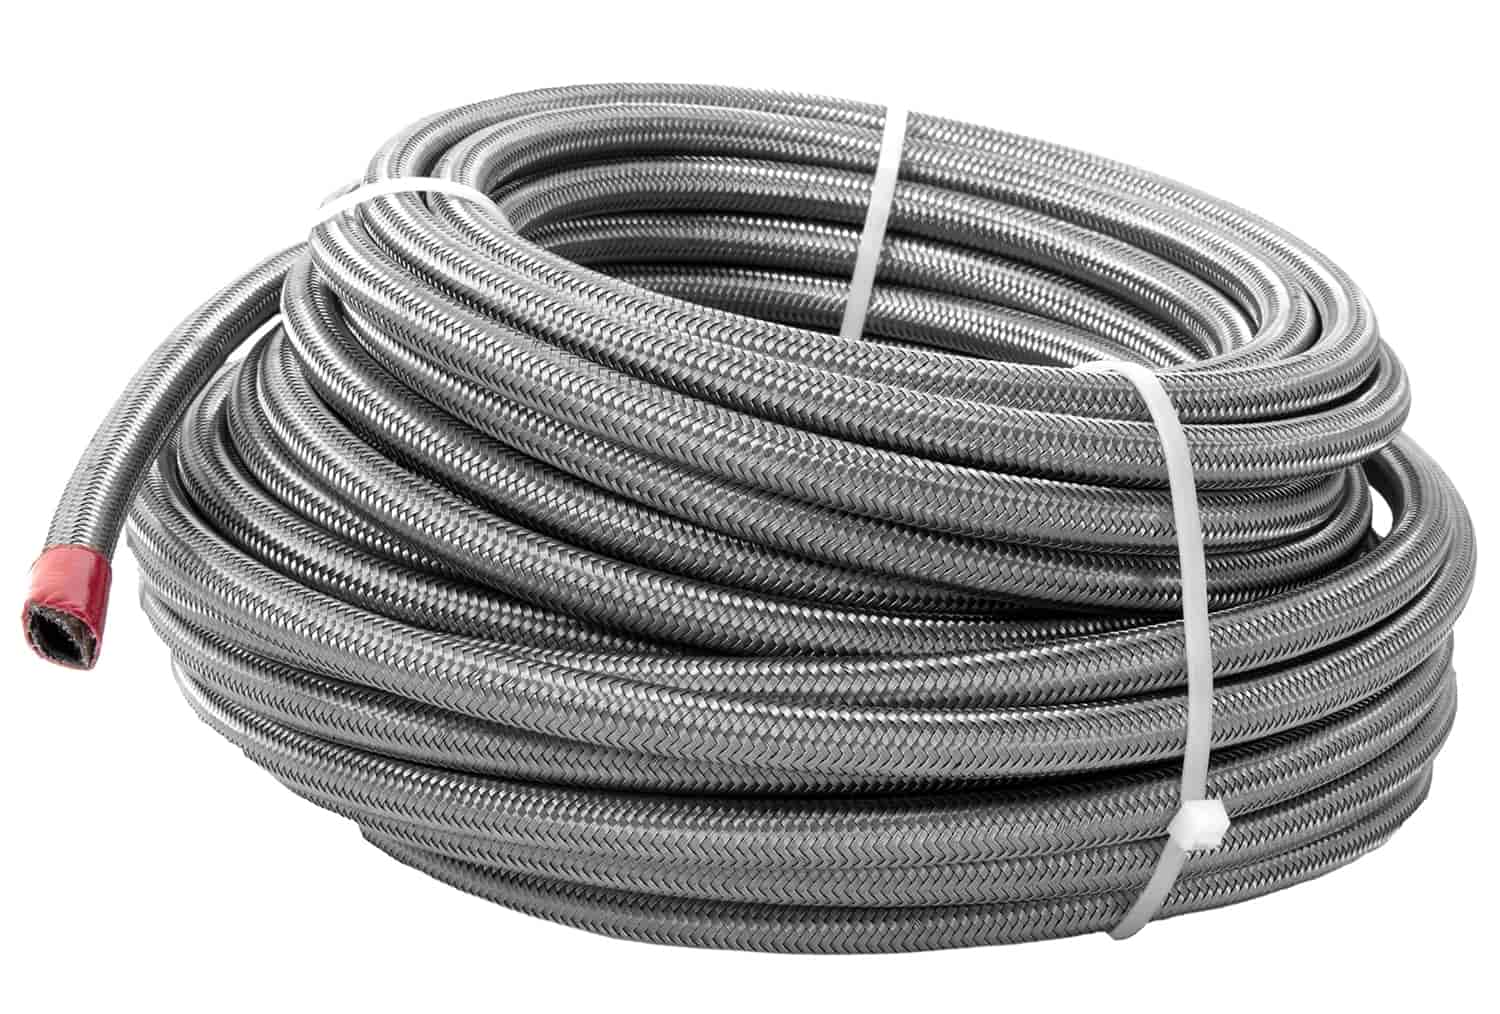 Braided Stainless Steel PTFE Fuel Hose -6 AN x 12 ft